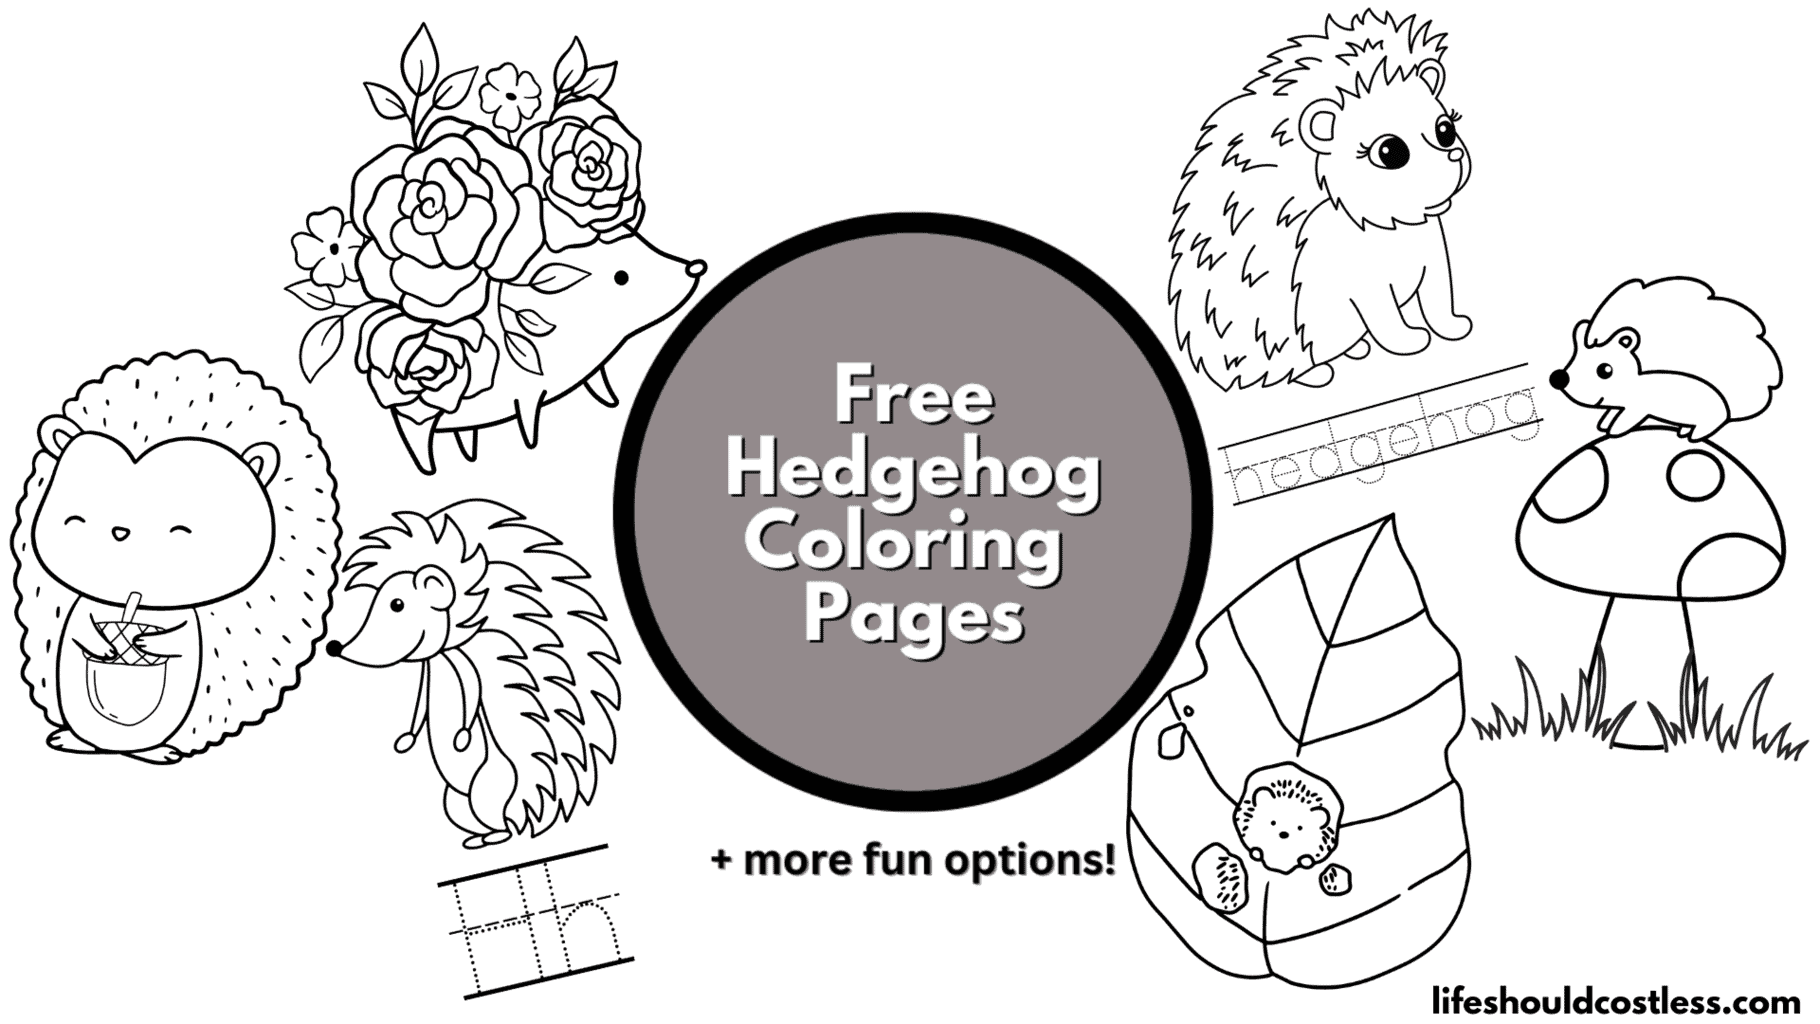 Hedgehog coloring pages free printable pdf templates